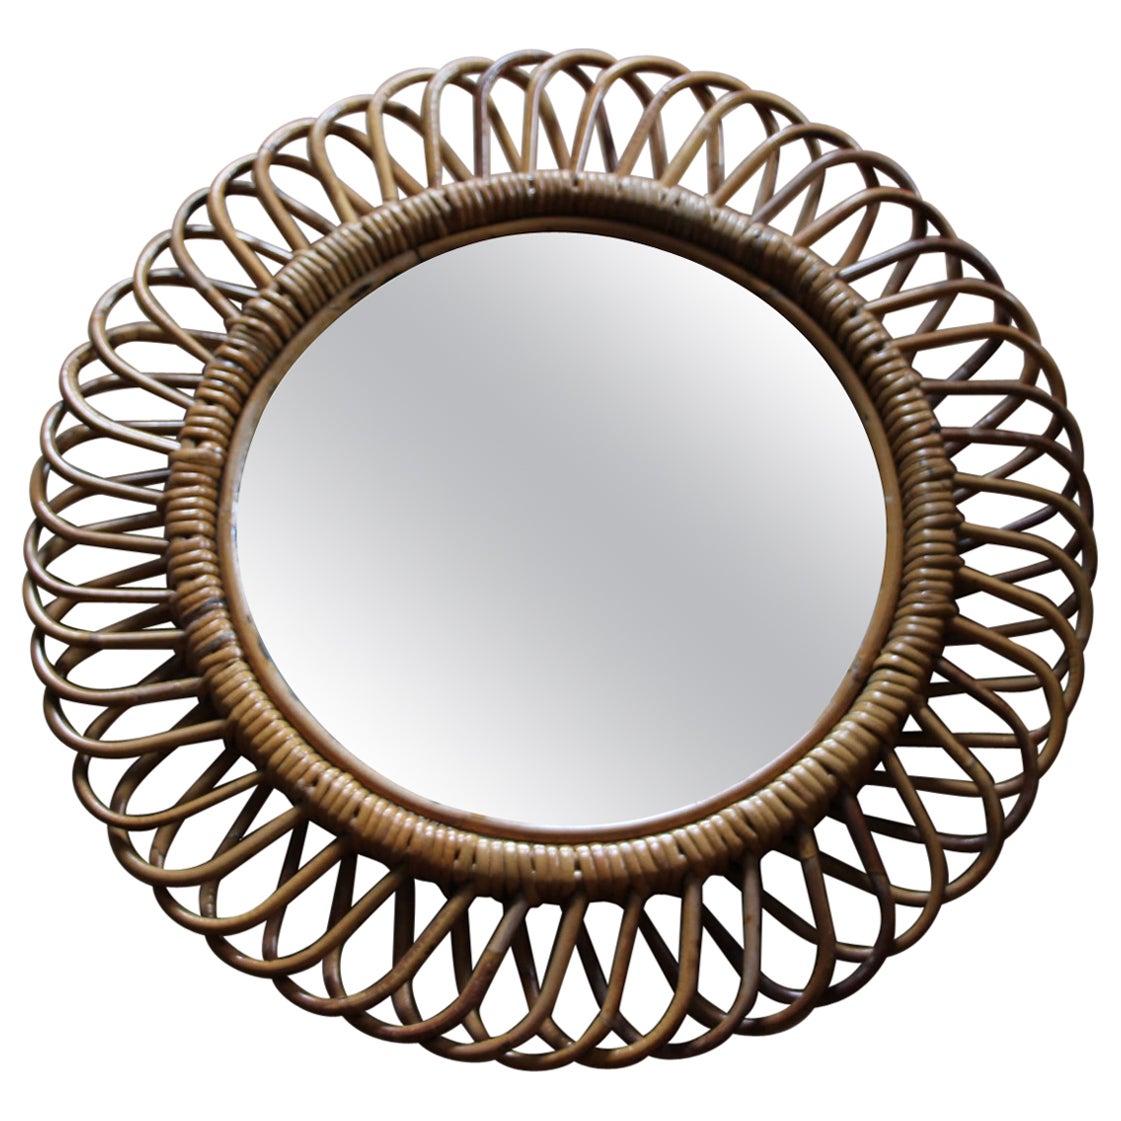 1960s Rattan and Bamboo Round Wall Mirror by Franco Albini For Sale